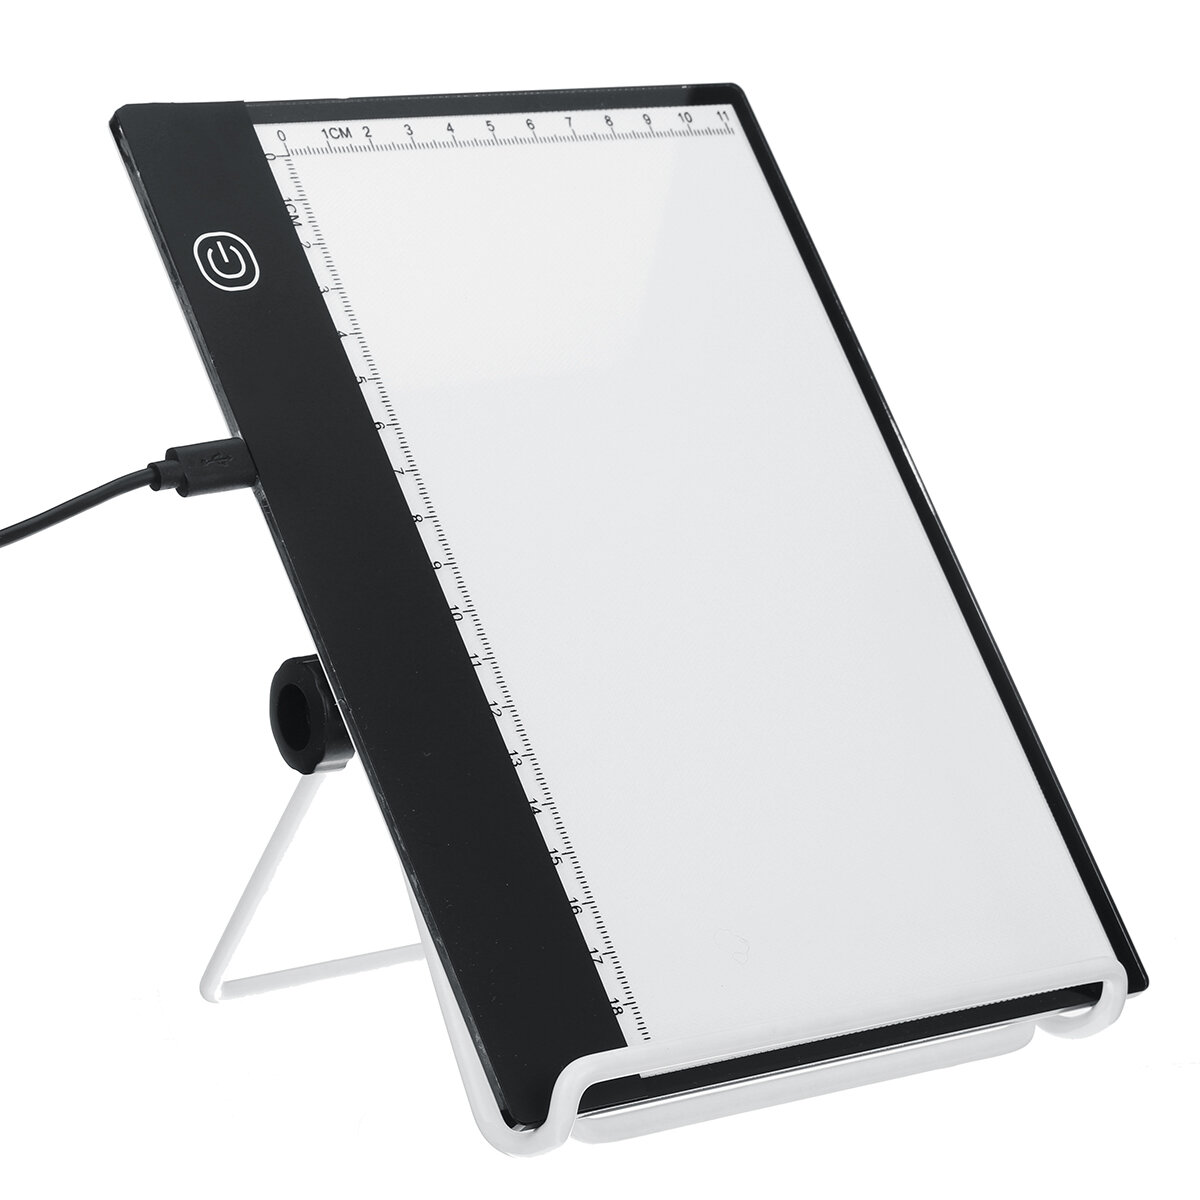 A5 LED Drawing Copy Pad with Scale USB Art Artcraft Graphic Painting Drawing Writing Board Electronic Art Writing Table